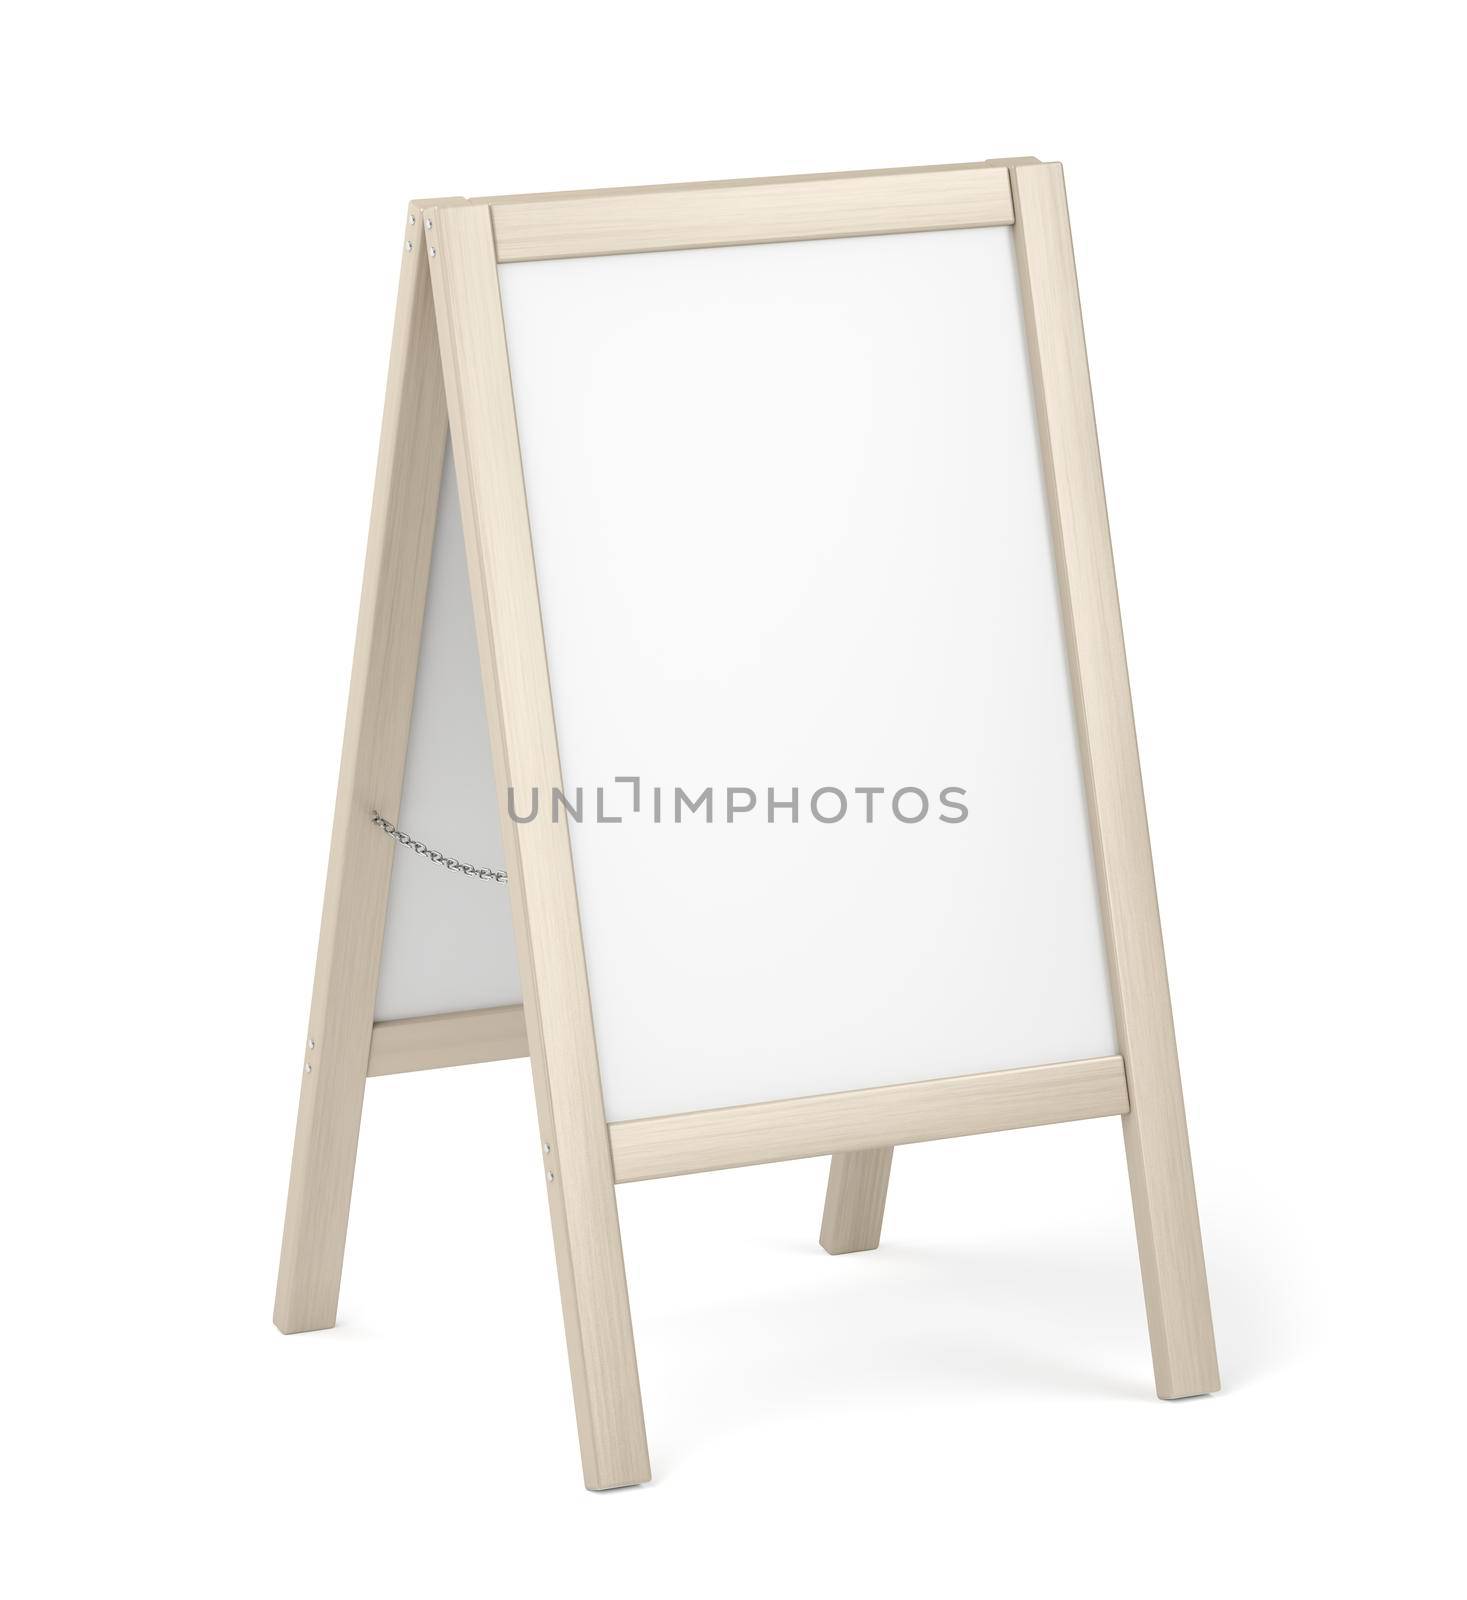 White advertising stand with wooden frame on white background